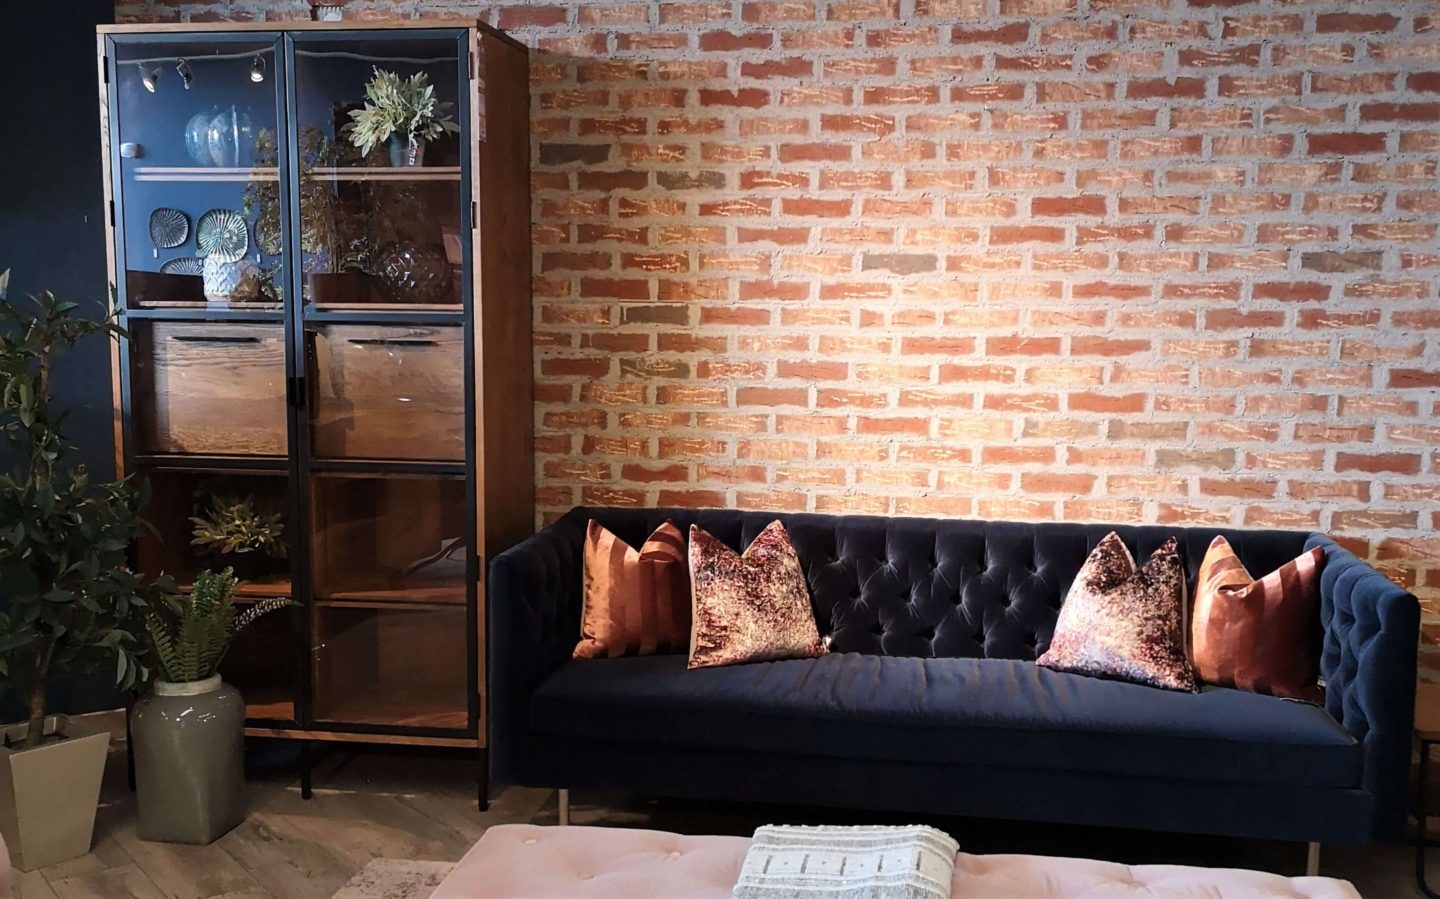 Living room with a ref brick wall, navy velet couch and a wooden dresser.